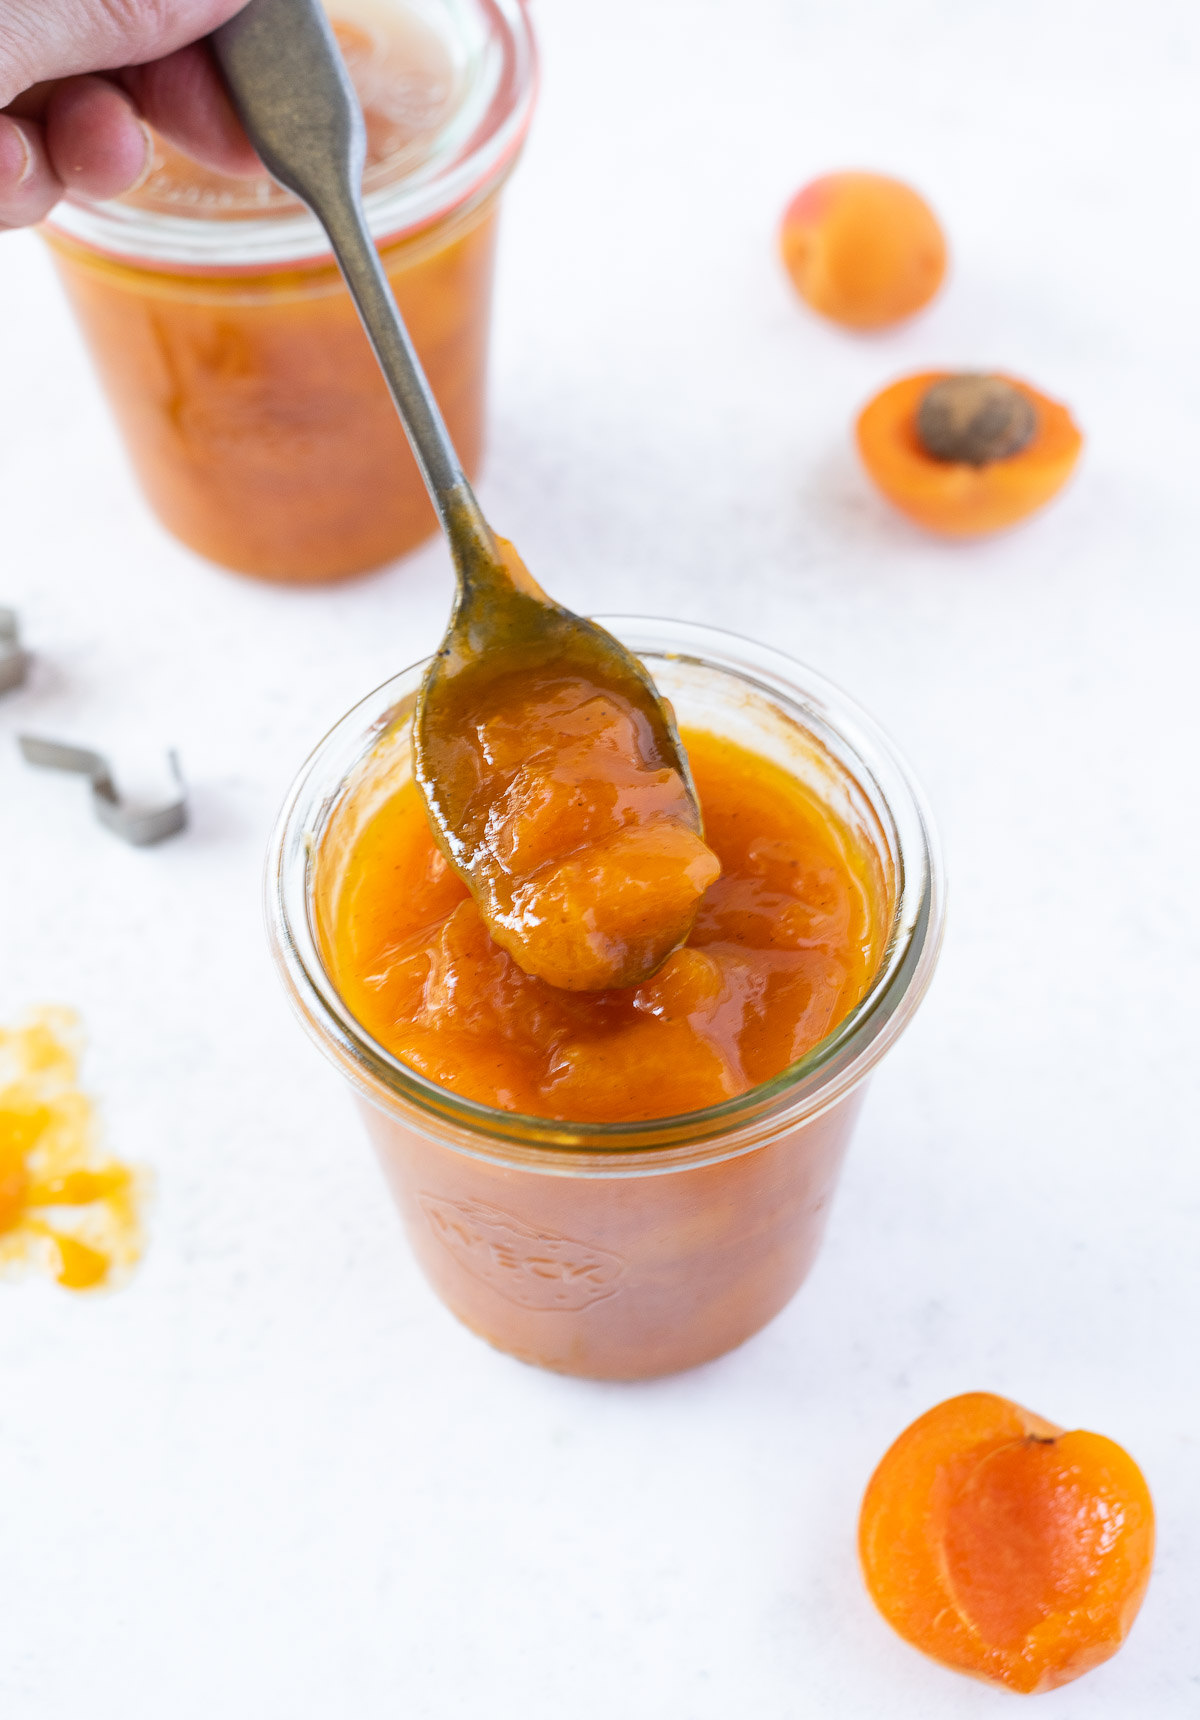 spoonful of apricot jam close up